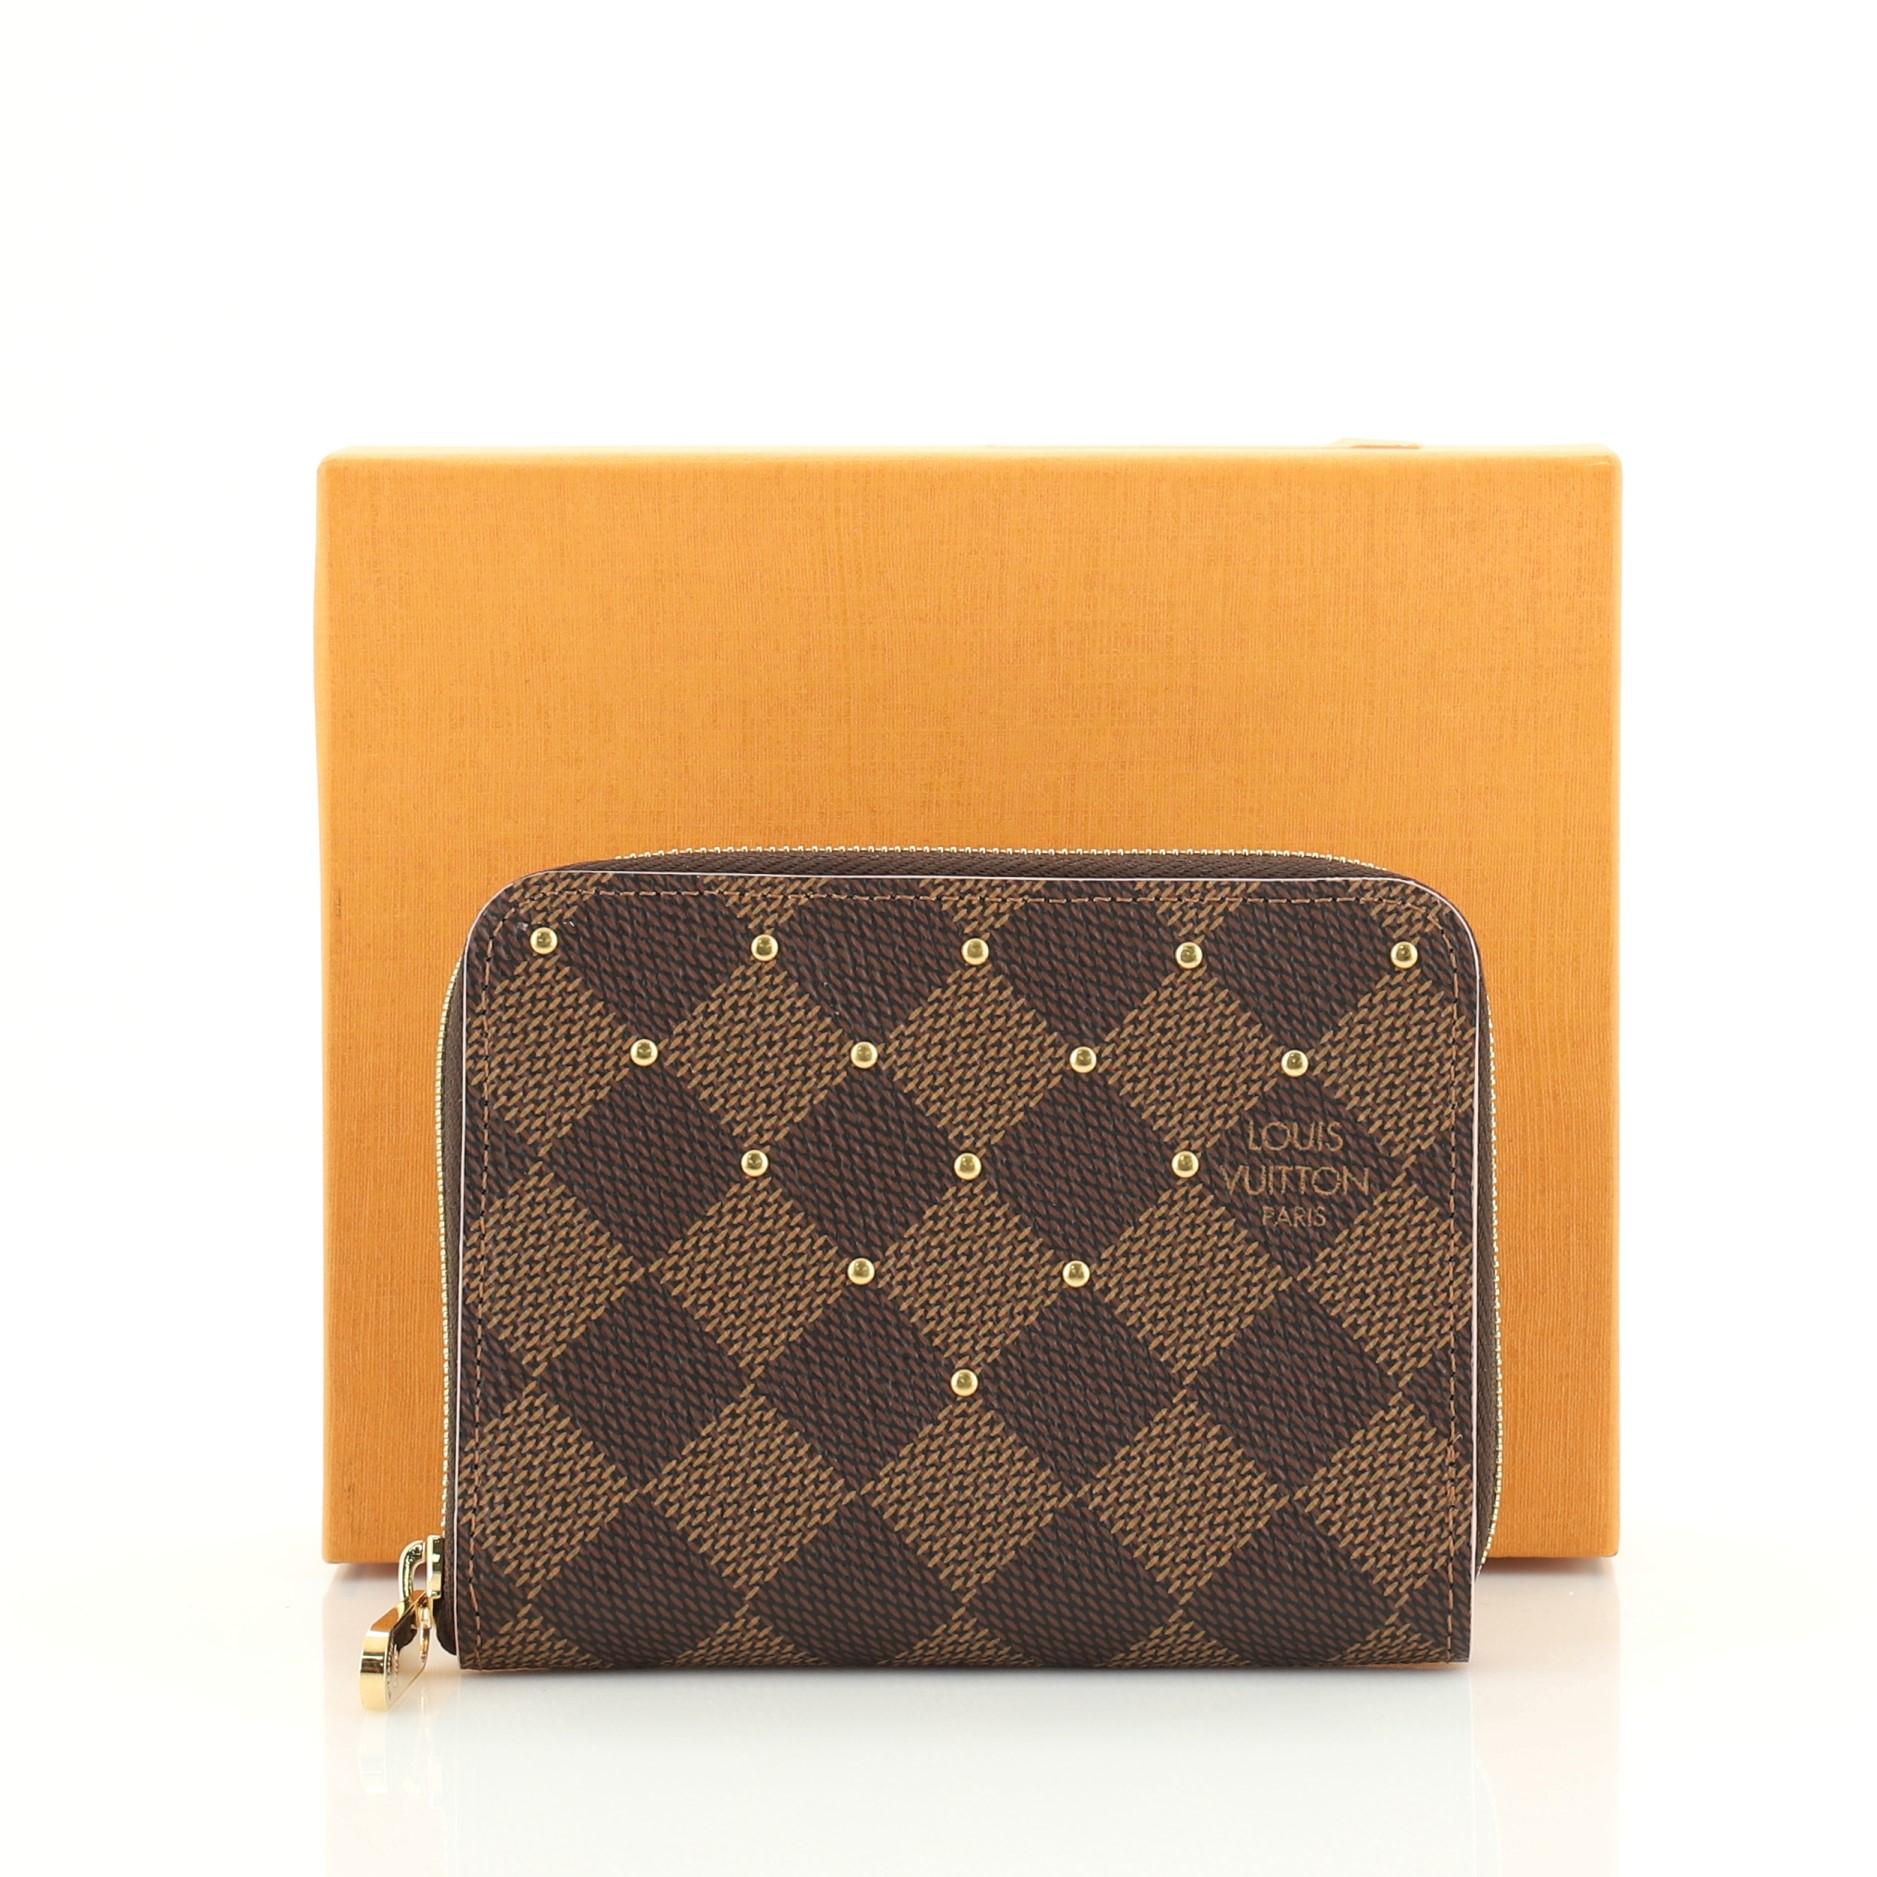 This Louis Vuitton Zippy Coin Purse Studded Damier, crafted in damier ebene studded coated canvas, features gold-tone hardware. Its all-around zip closure opens to a pink leather interior with multiple card slots and slip pockets. Authenticity code